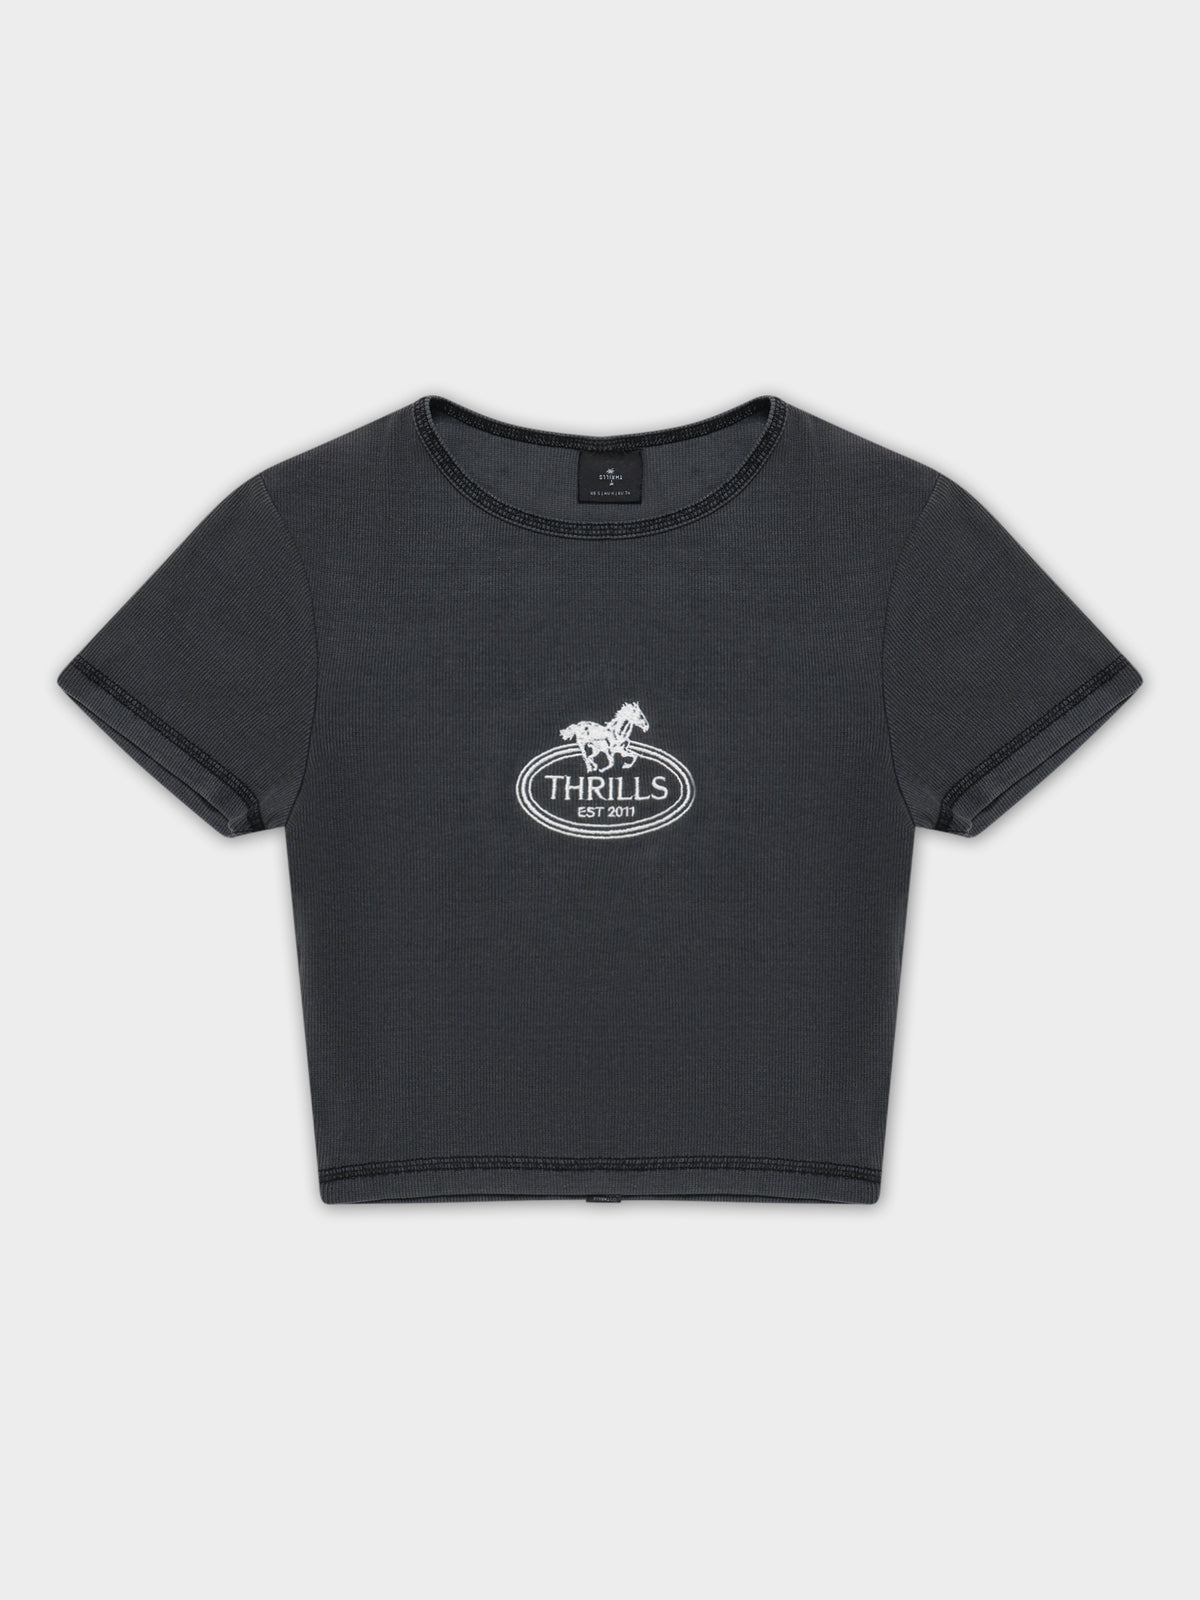 Chariot Oval Baby T-Shirt in Merch Black